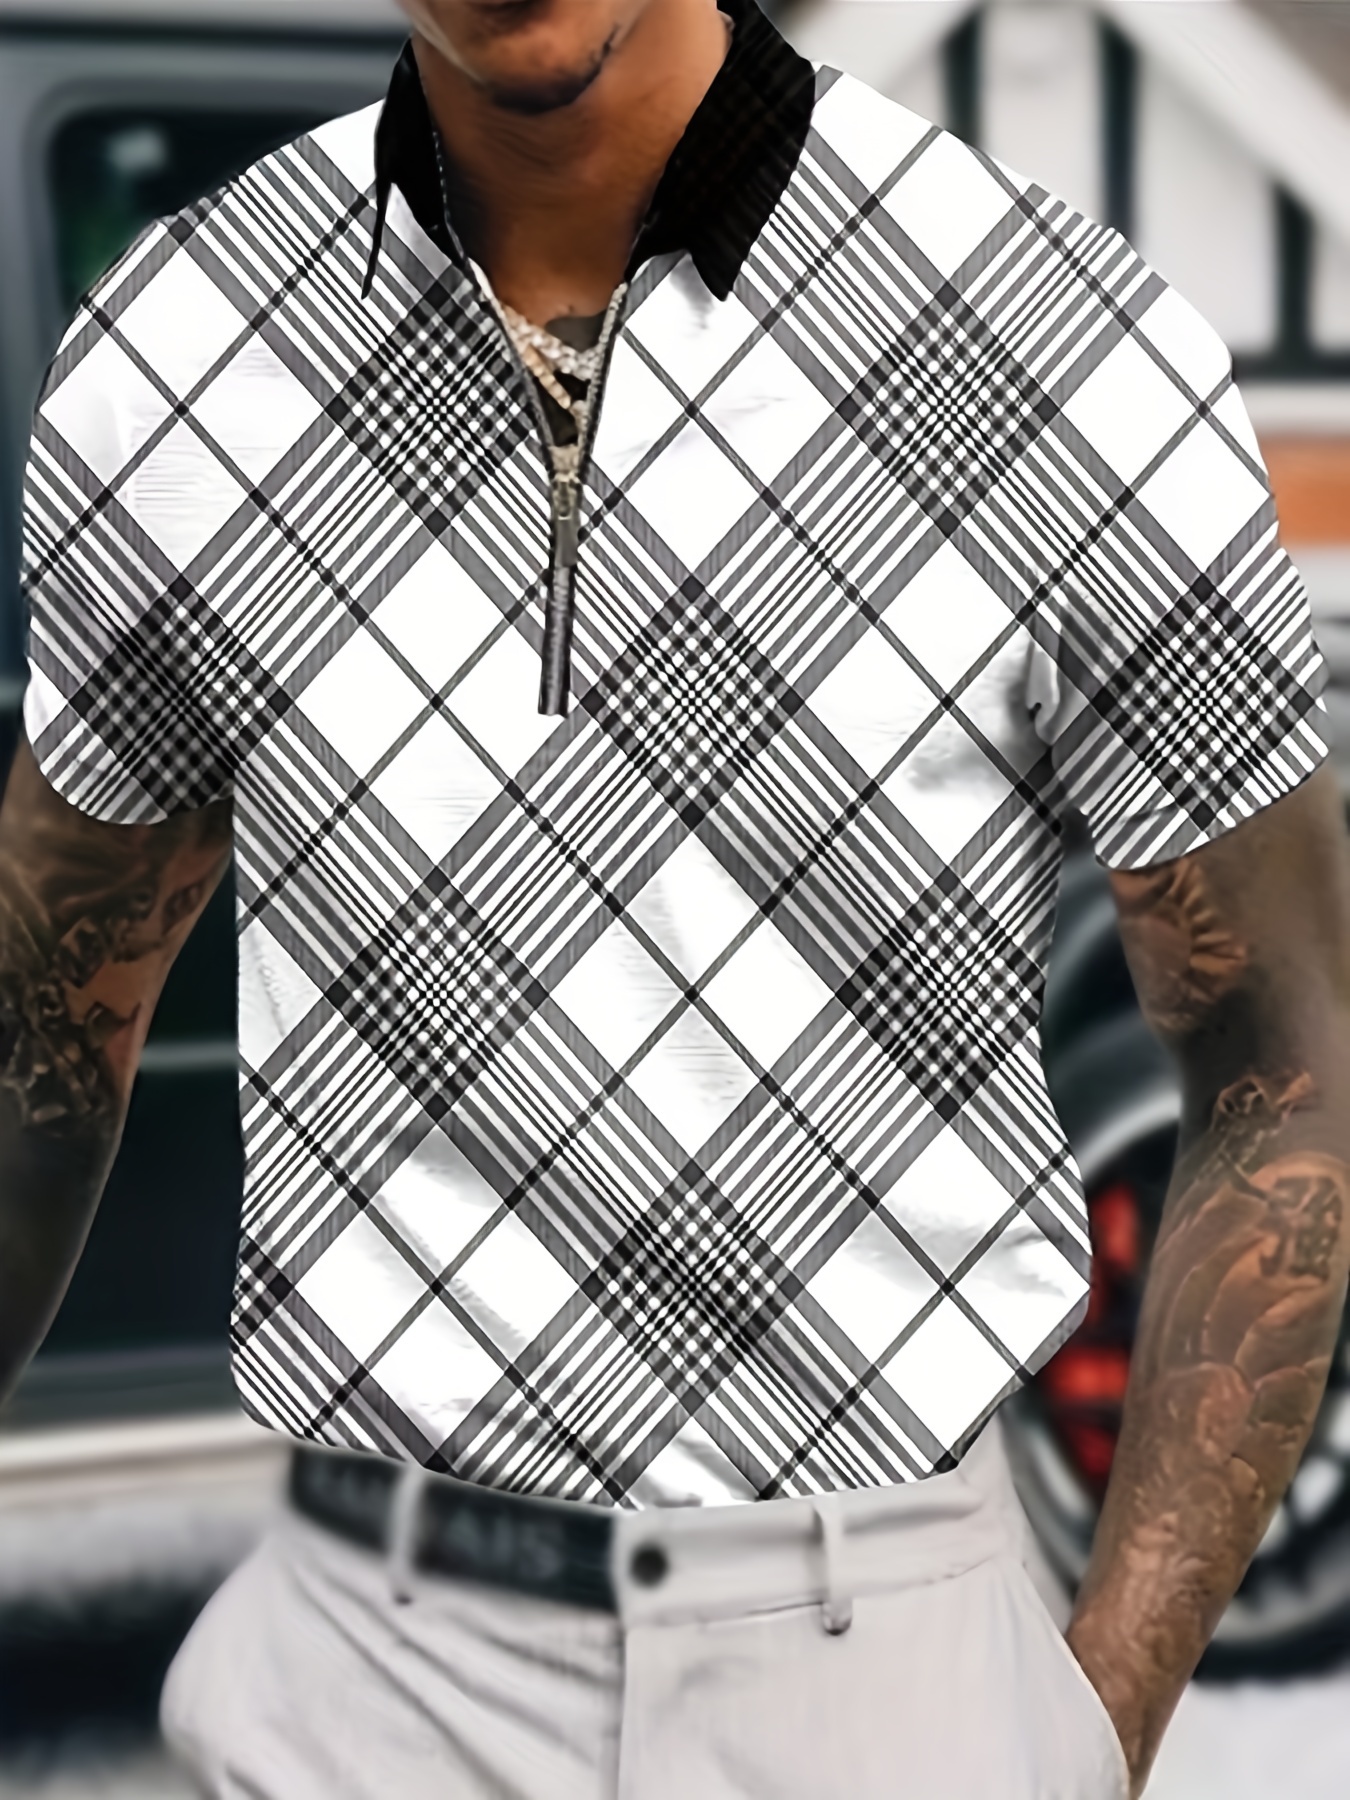 Casual Short Sleeves with Checkered Prints Shirt